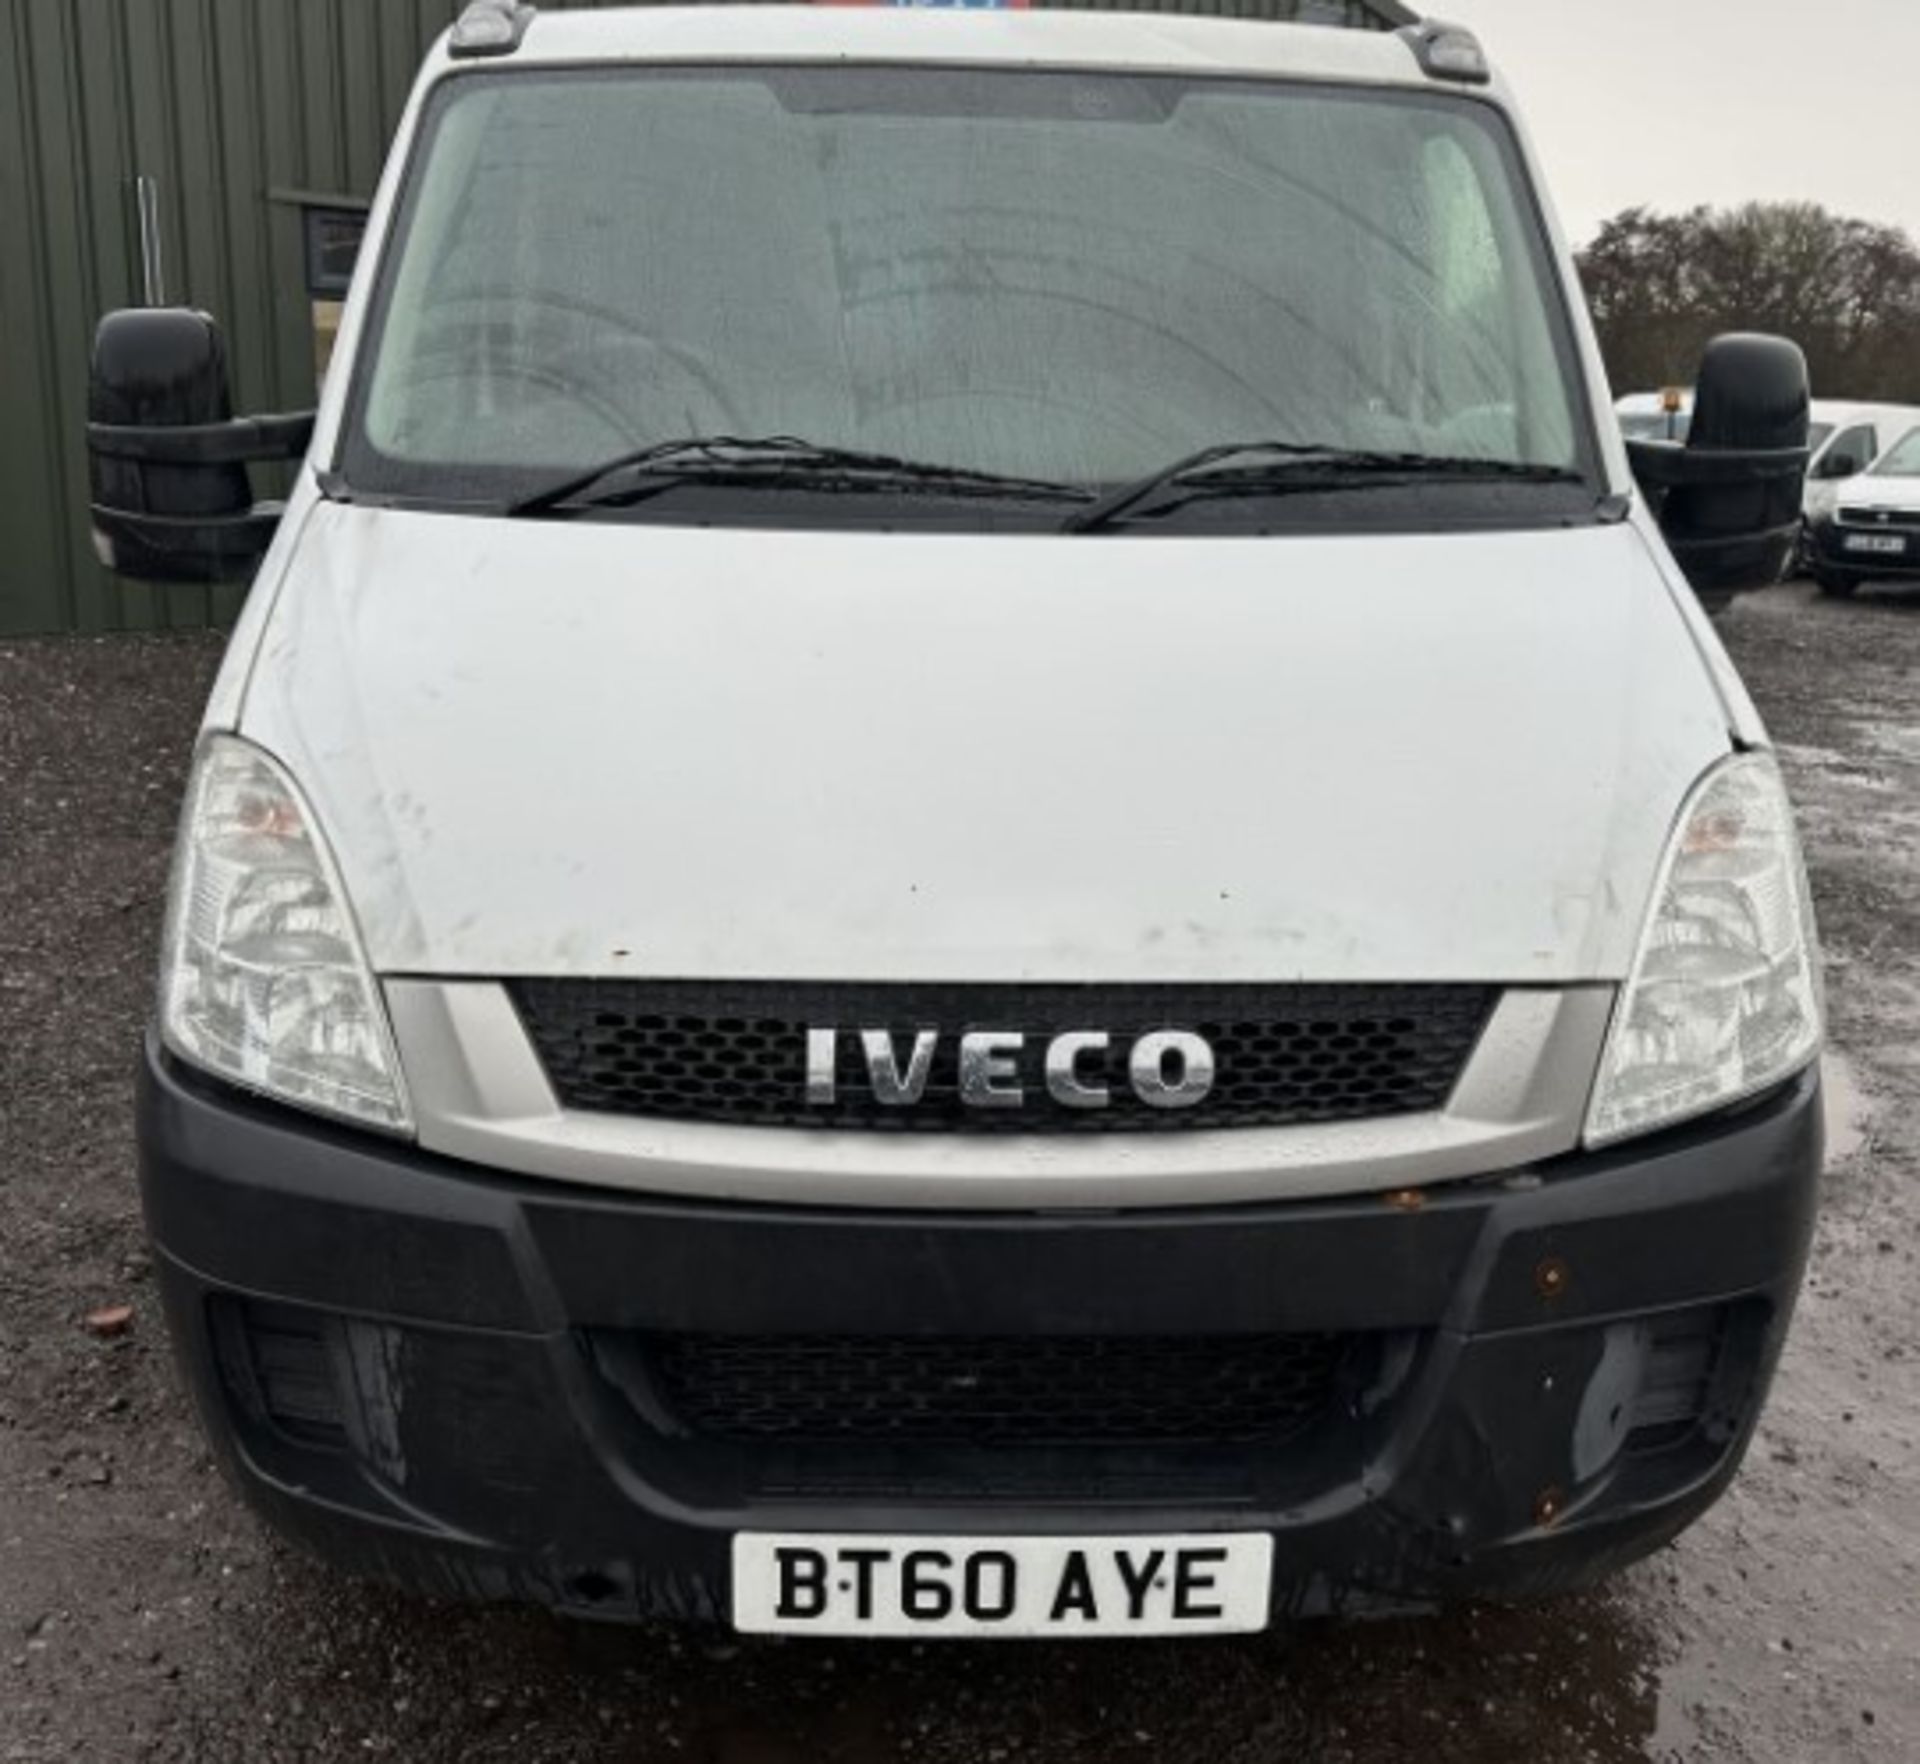 DEAL ALERT: 60 PLATE IVECO DAILY, AUTOMATIC, CLEAN BODY, GEAR ISSUE >>--NO VAT ON HAMMER--<<